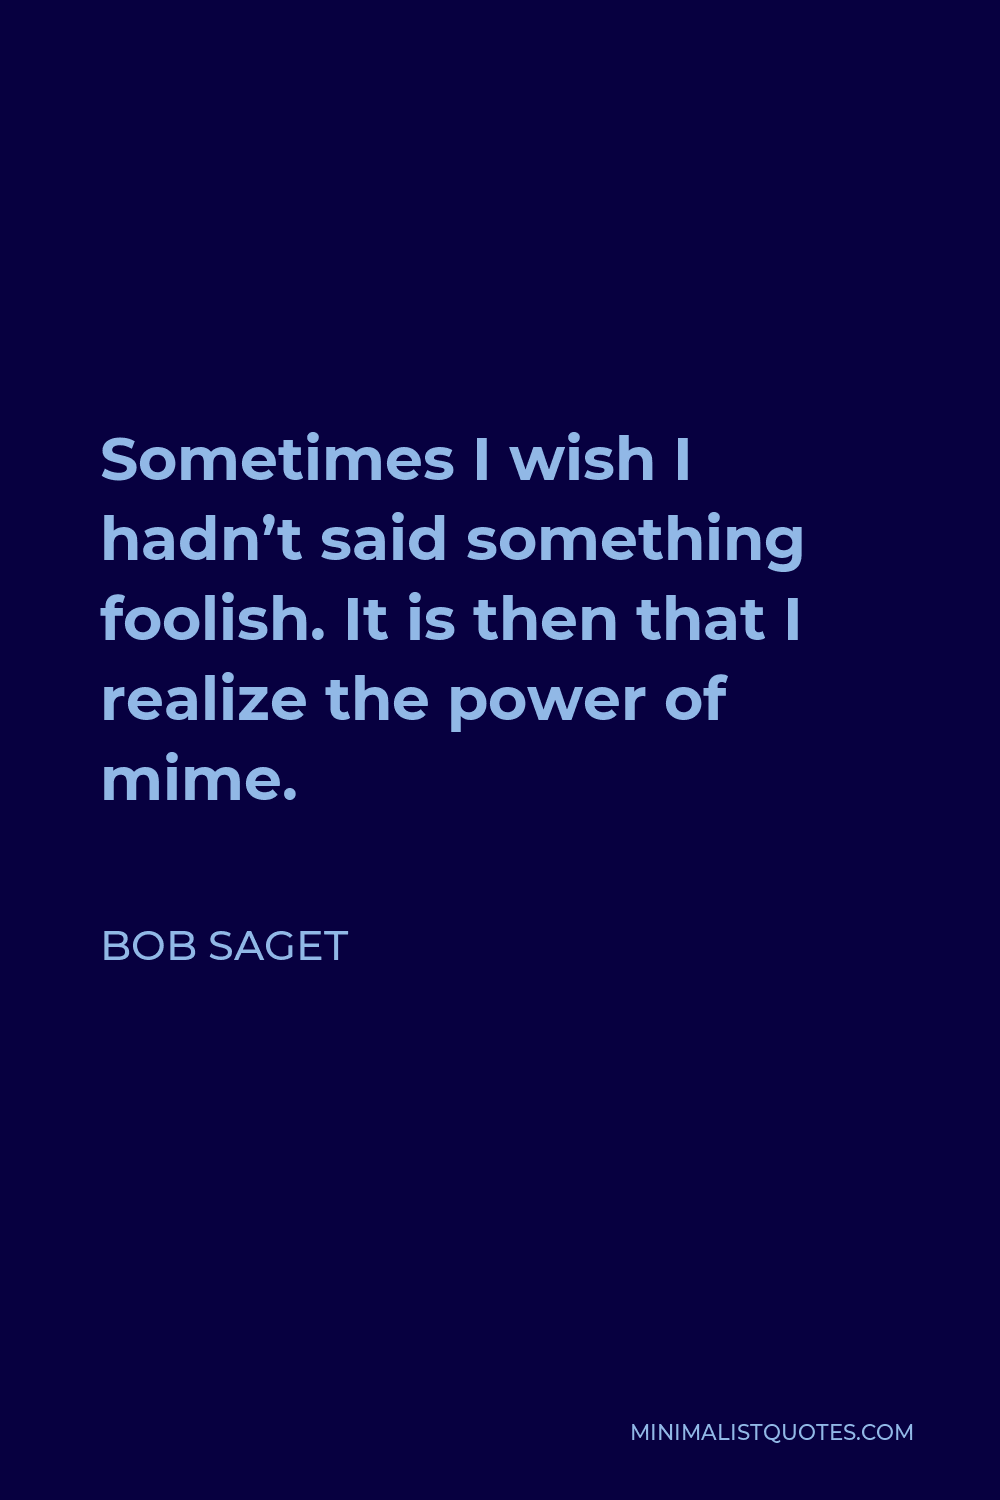 Bob Saget Quote - Sometimes I wish I hadn’t said something foolish. It is then that I realize the power of mime.